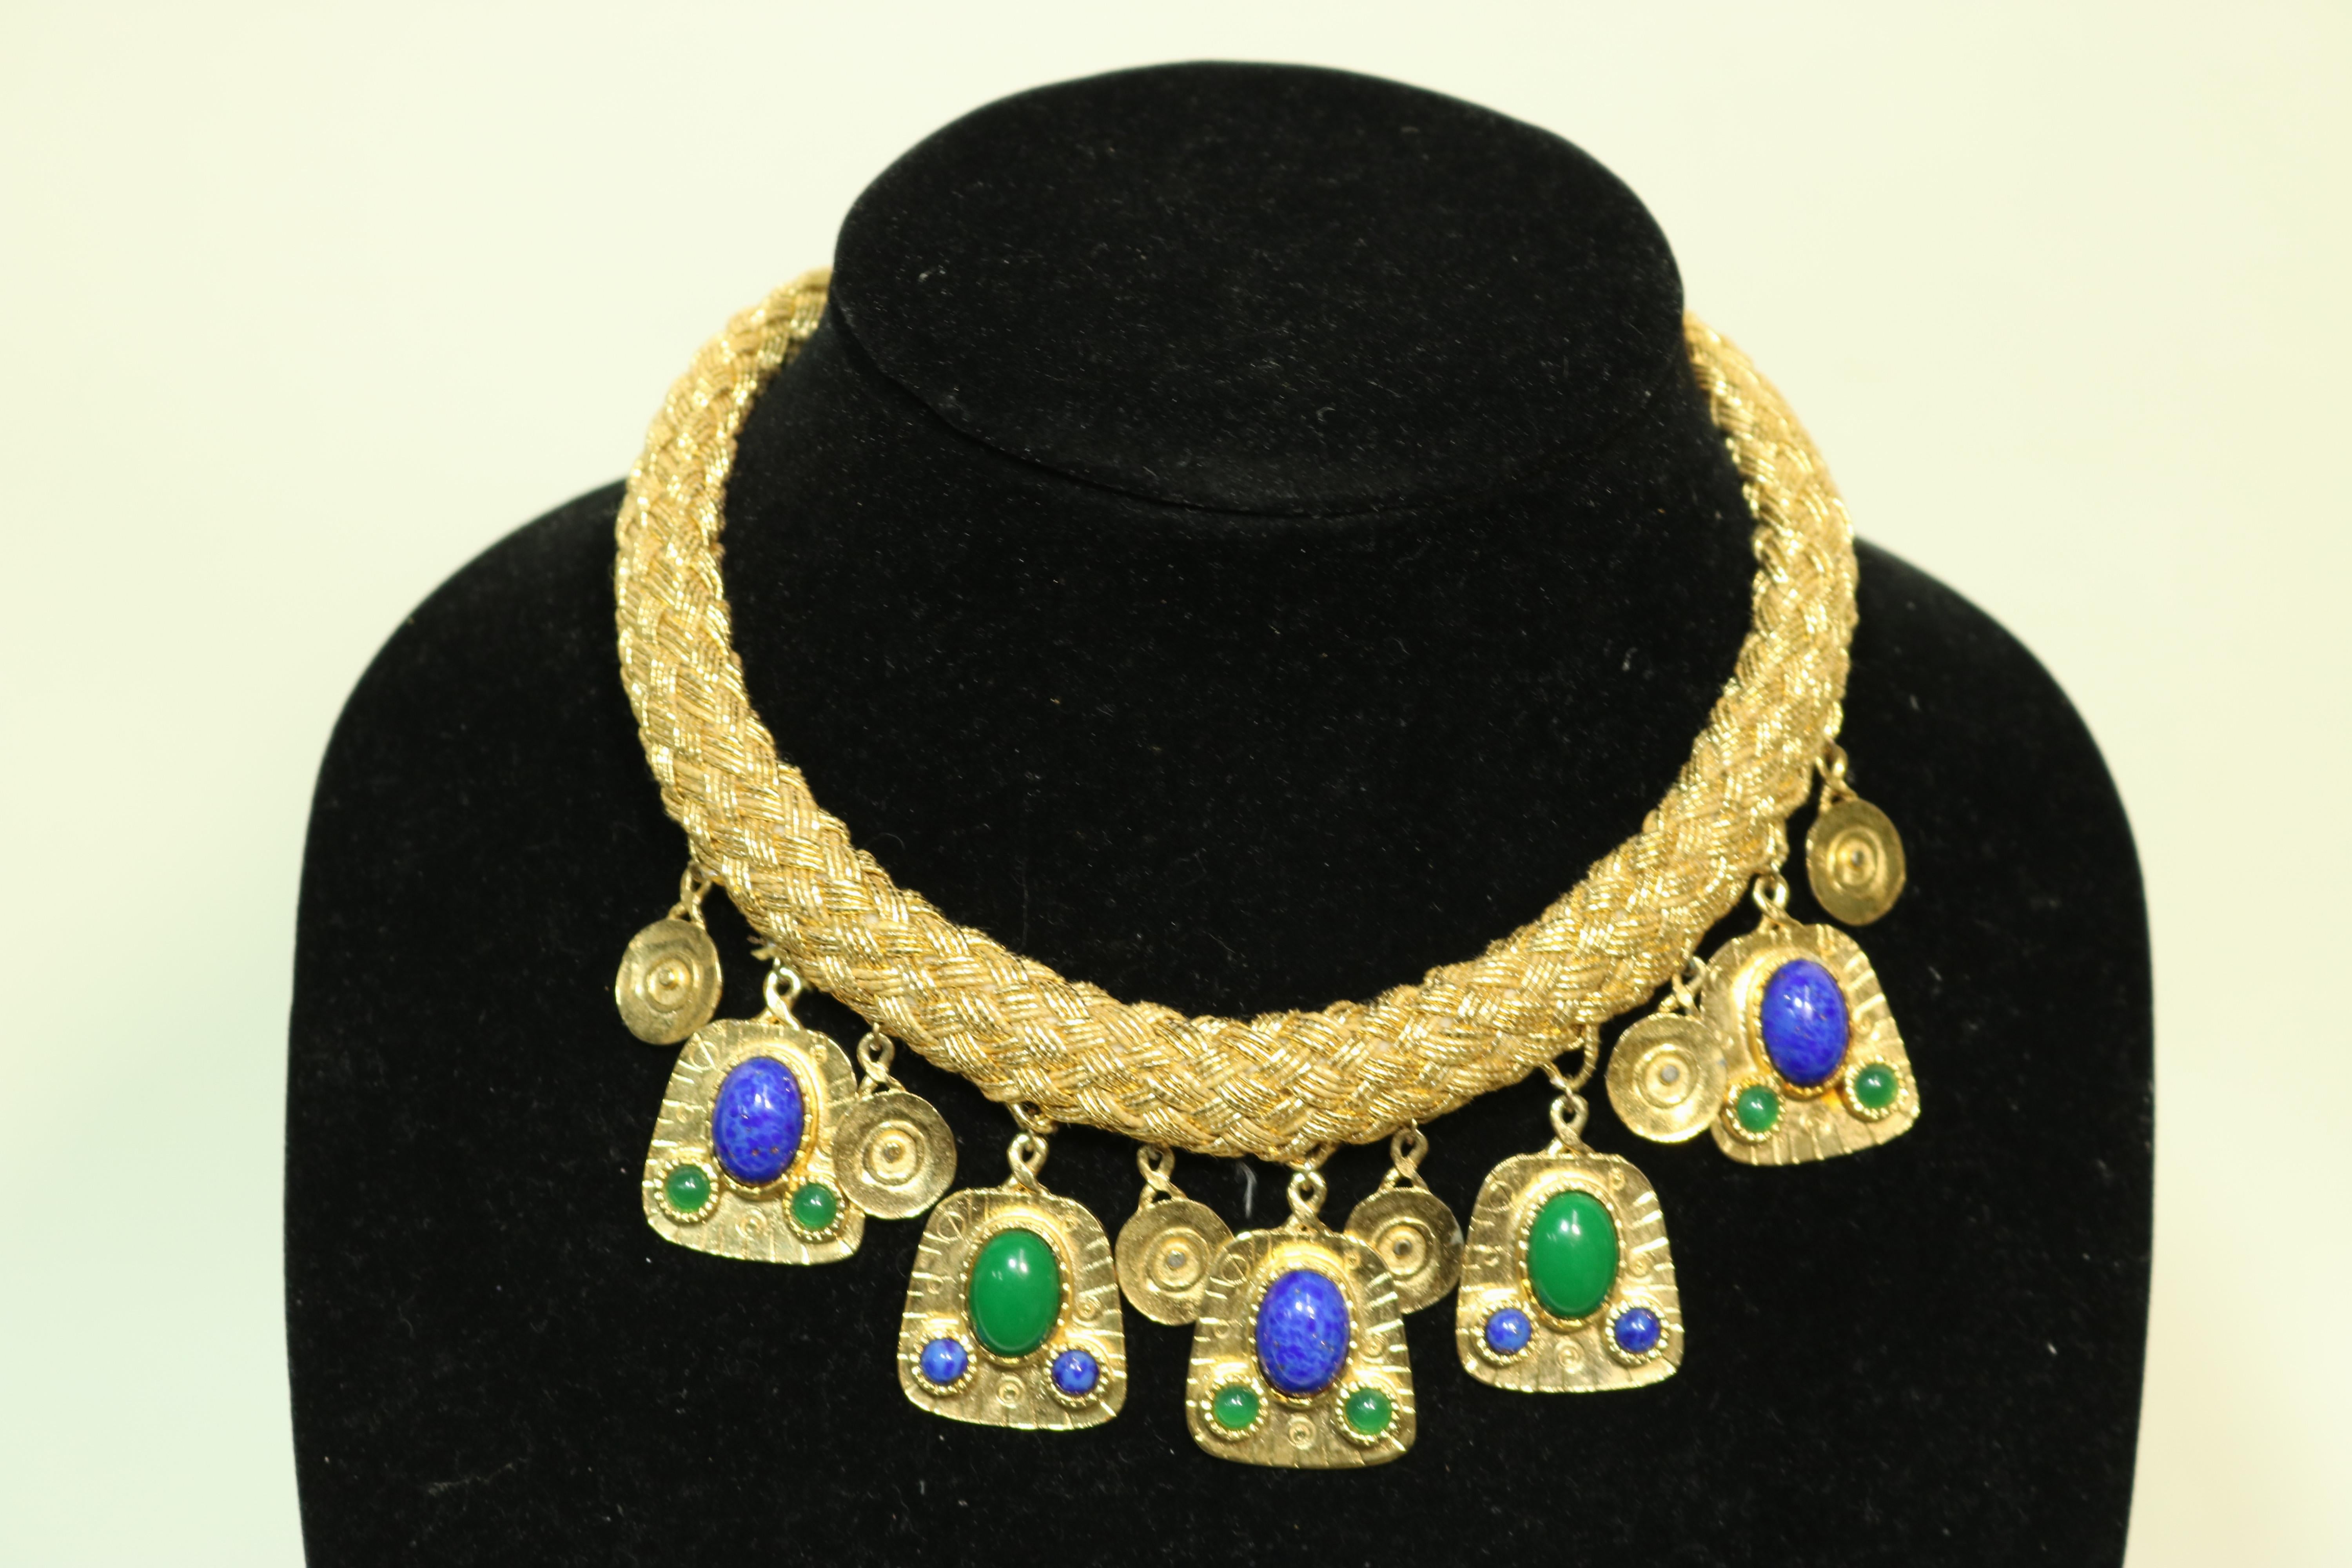 Stunning Egyptian Revival style woven gold thread collar necklace with heavy gold plate articulated drops laden with alternating faux malachite and authentic lapis cabochons and circular gold plate drops.

An exotic Cleopatra look makes for a